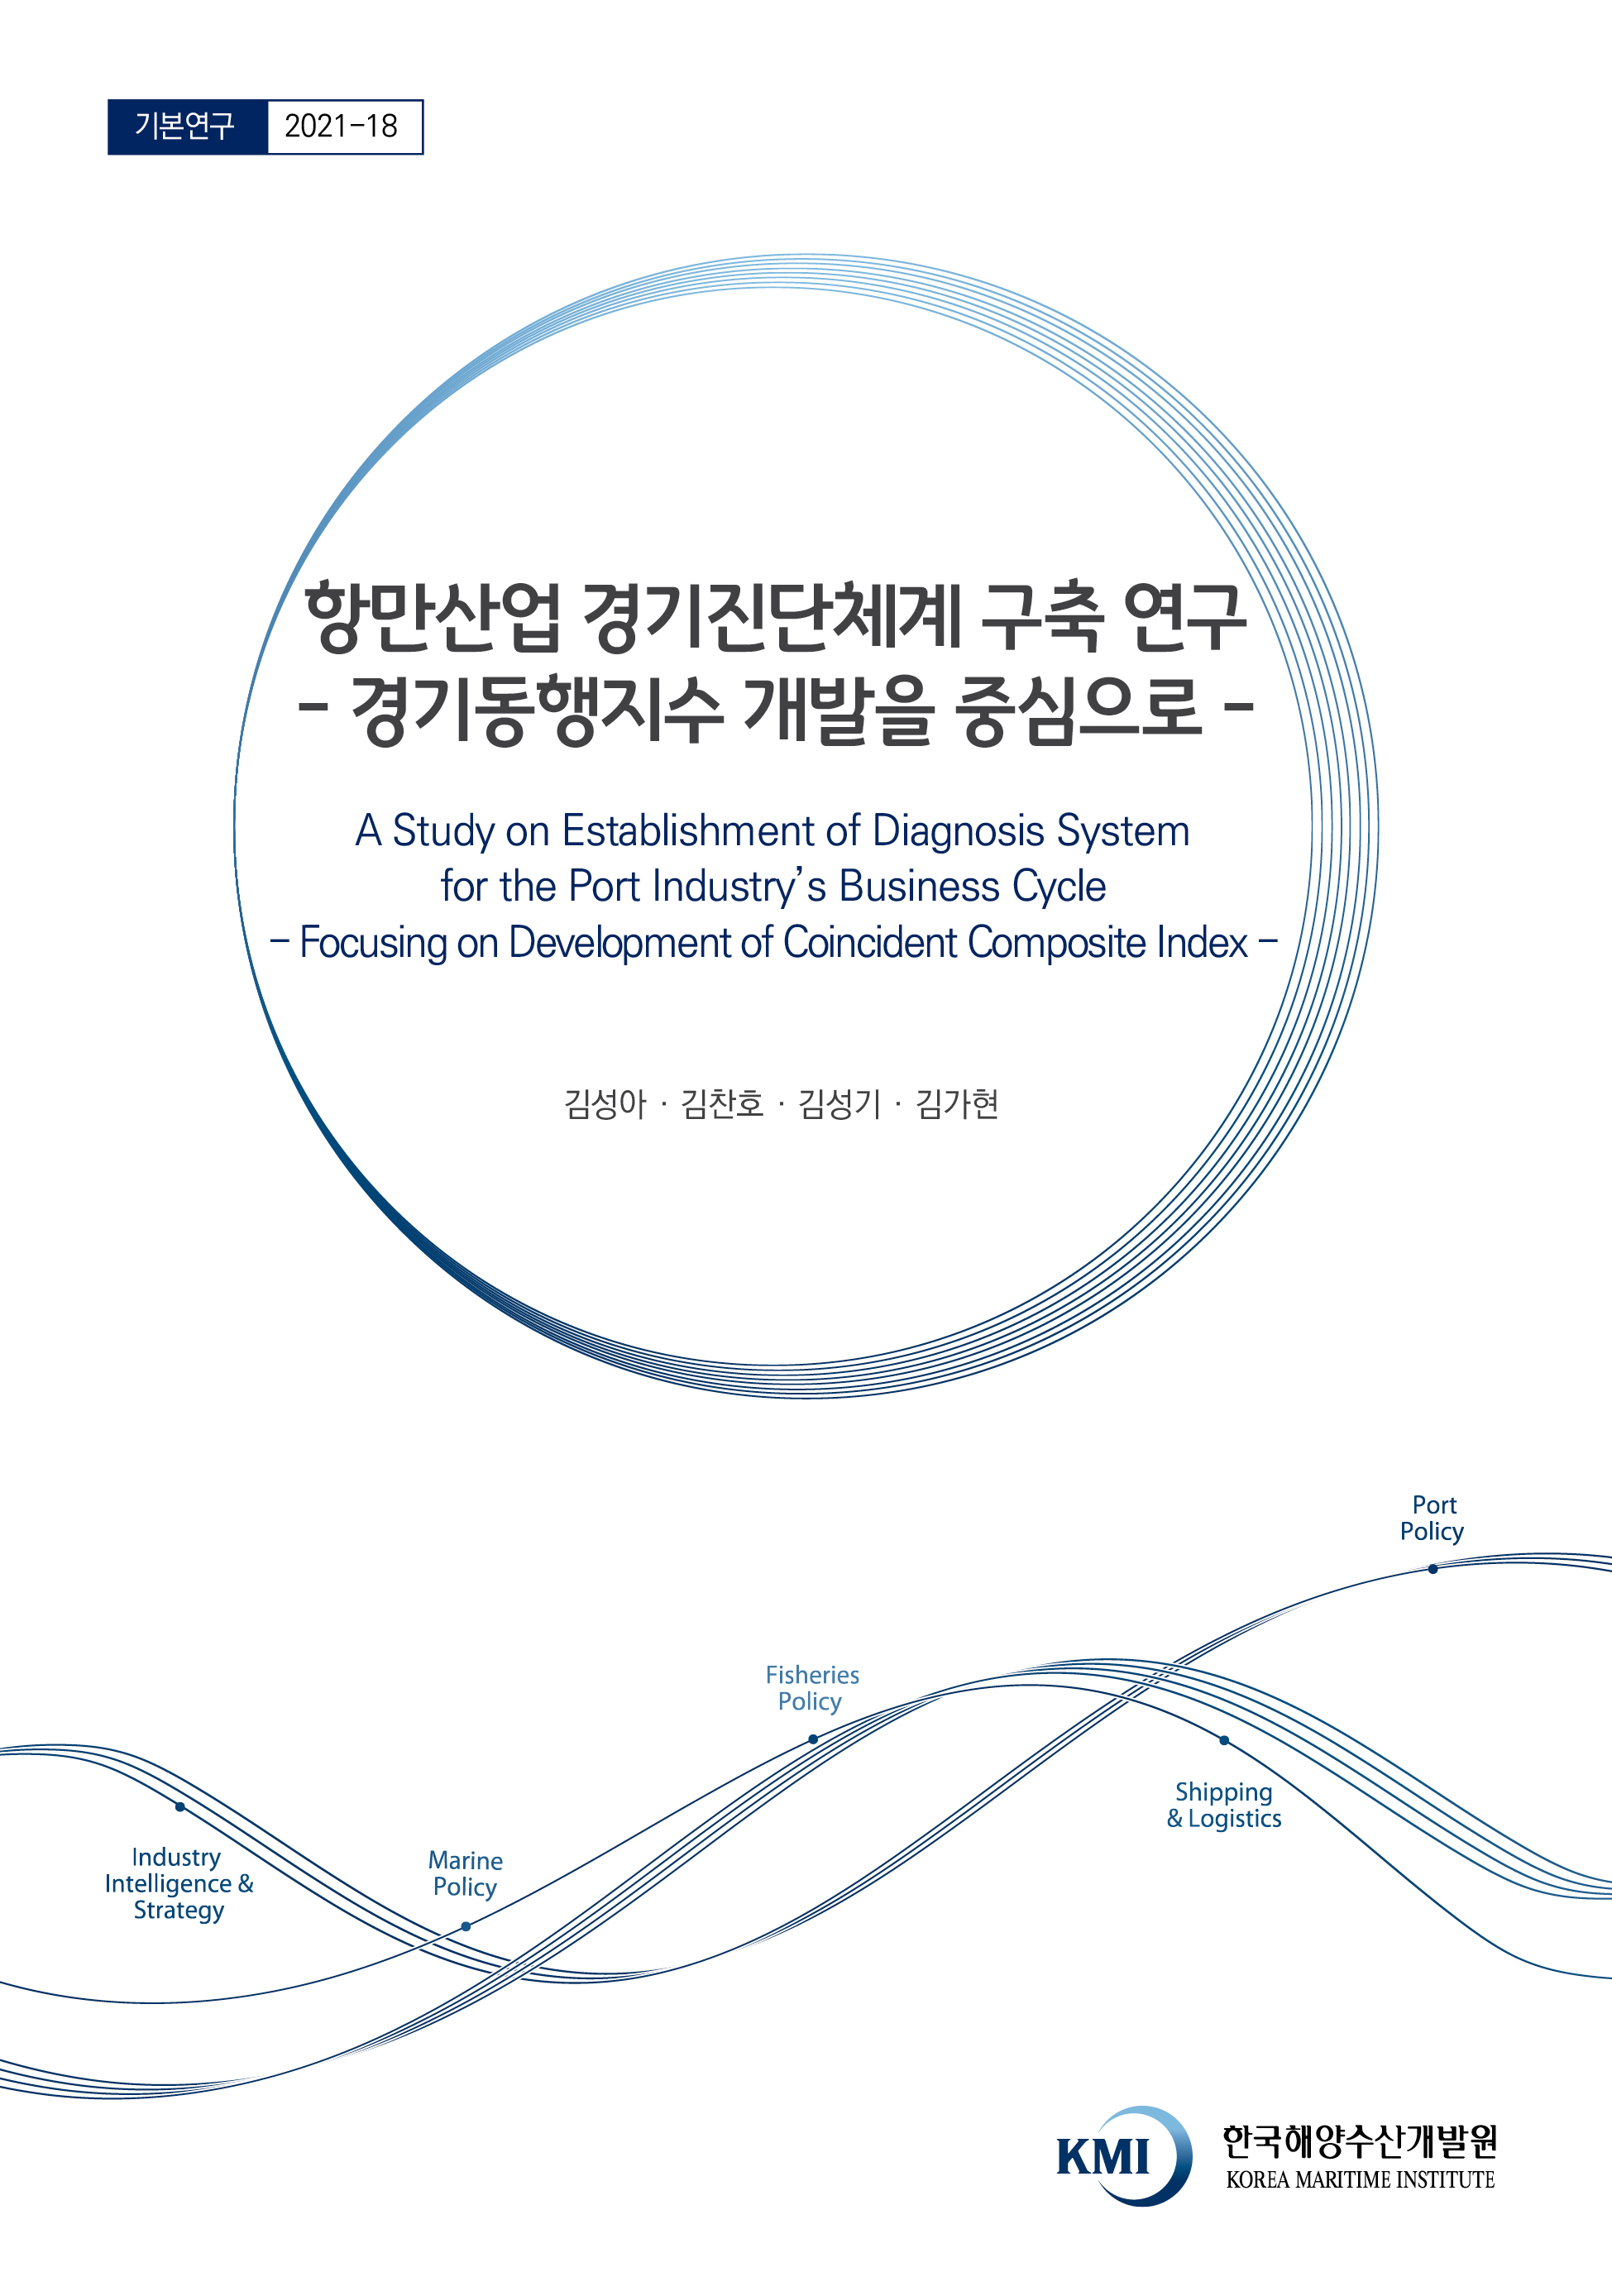 A Study on Establishment of Diagnosis System for the Port Industry's Business Cycle